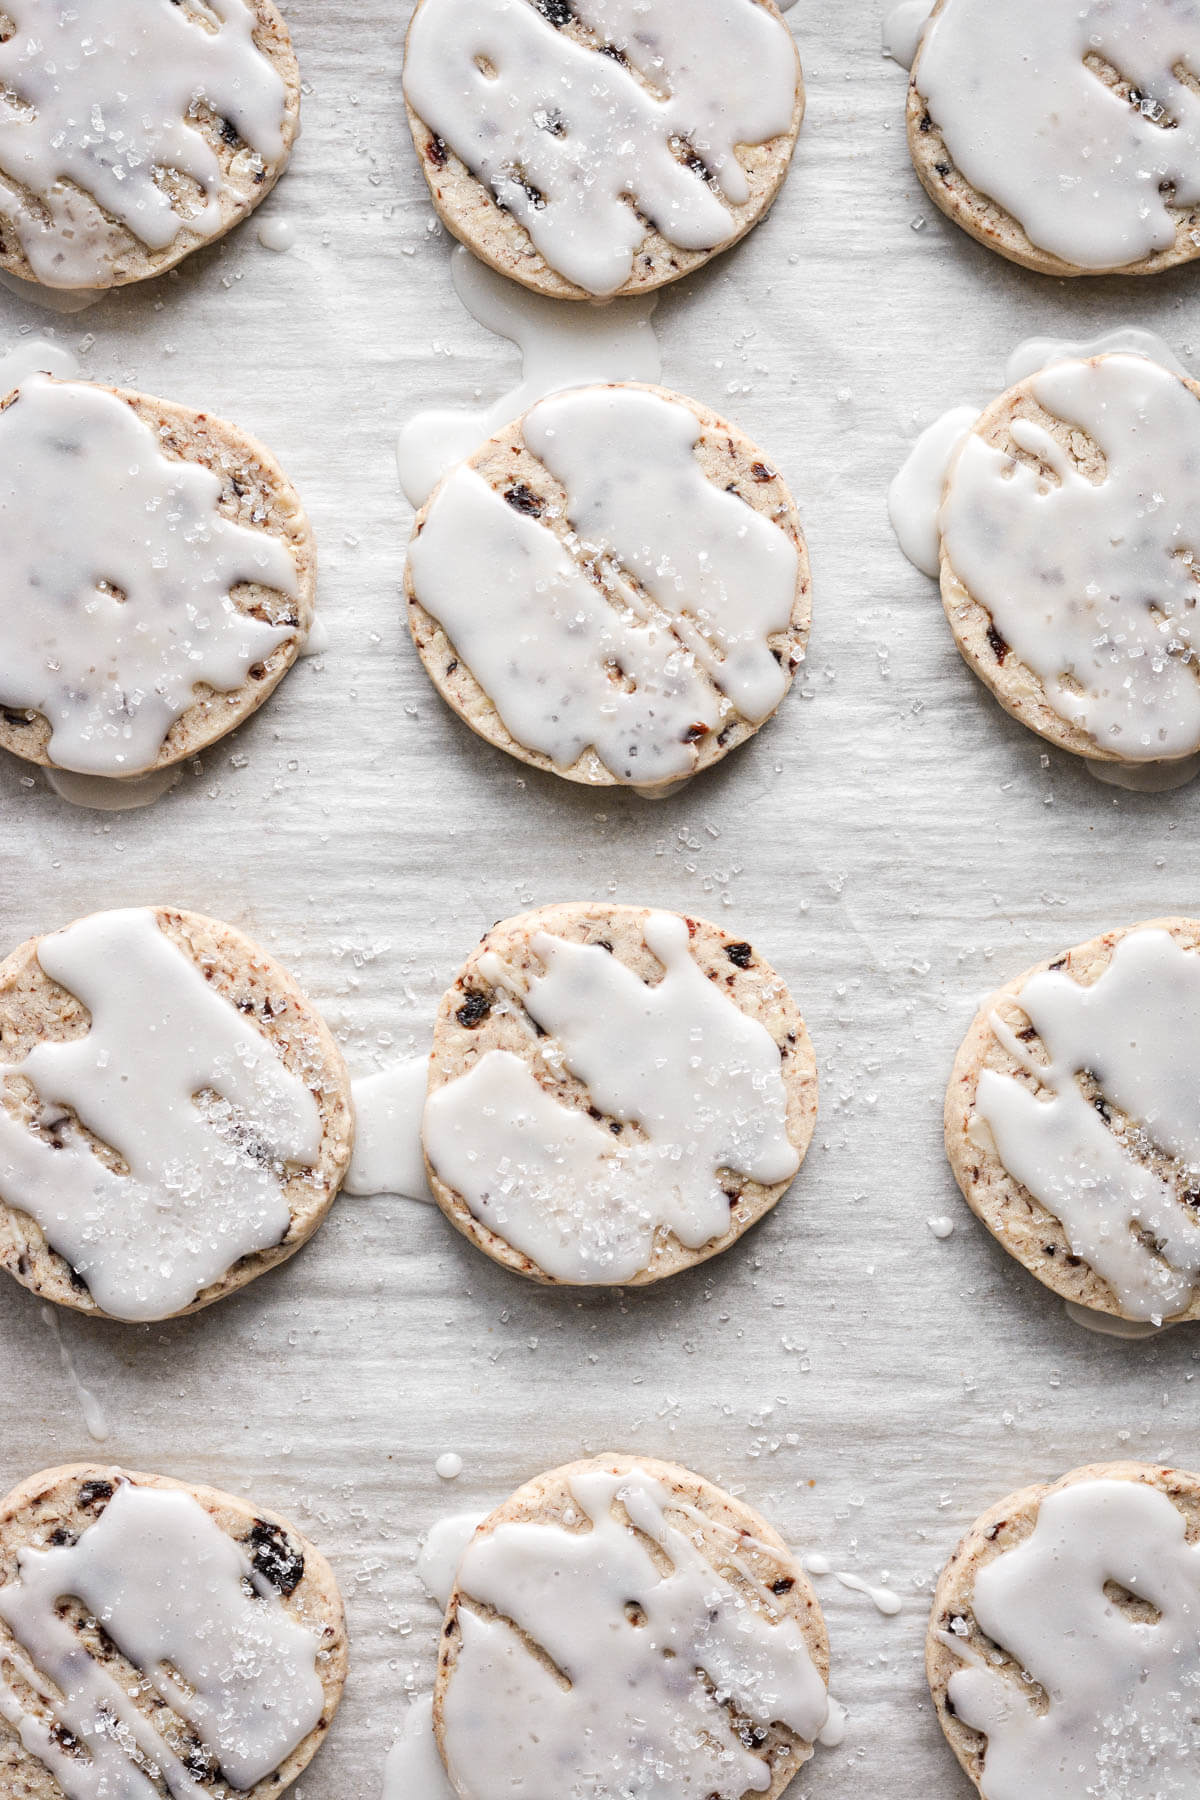 Cherry almond shortbread cookies with vanilla almond icing.